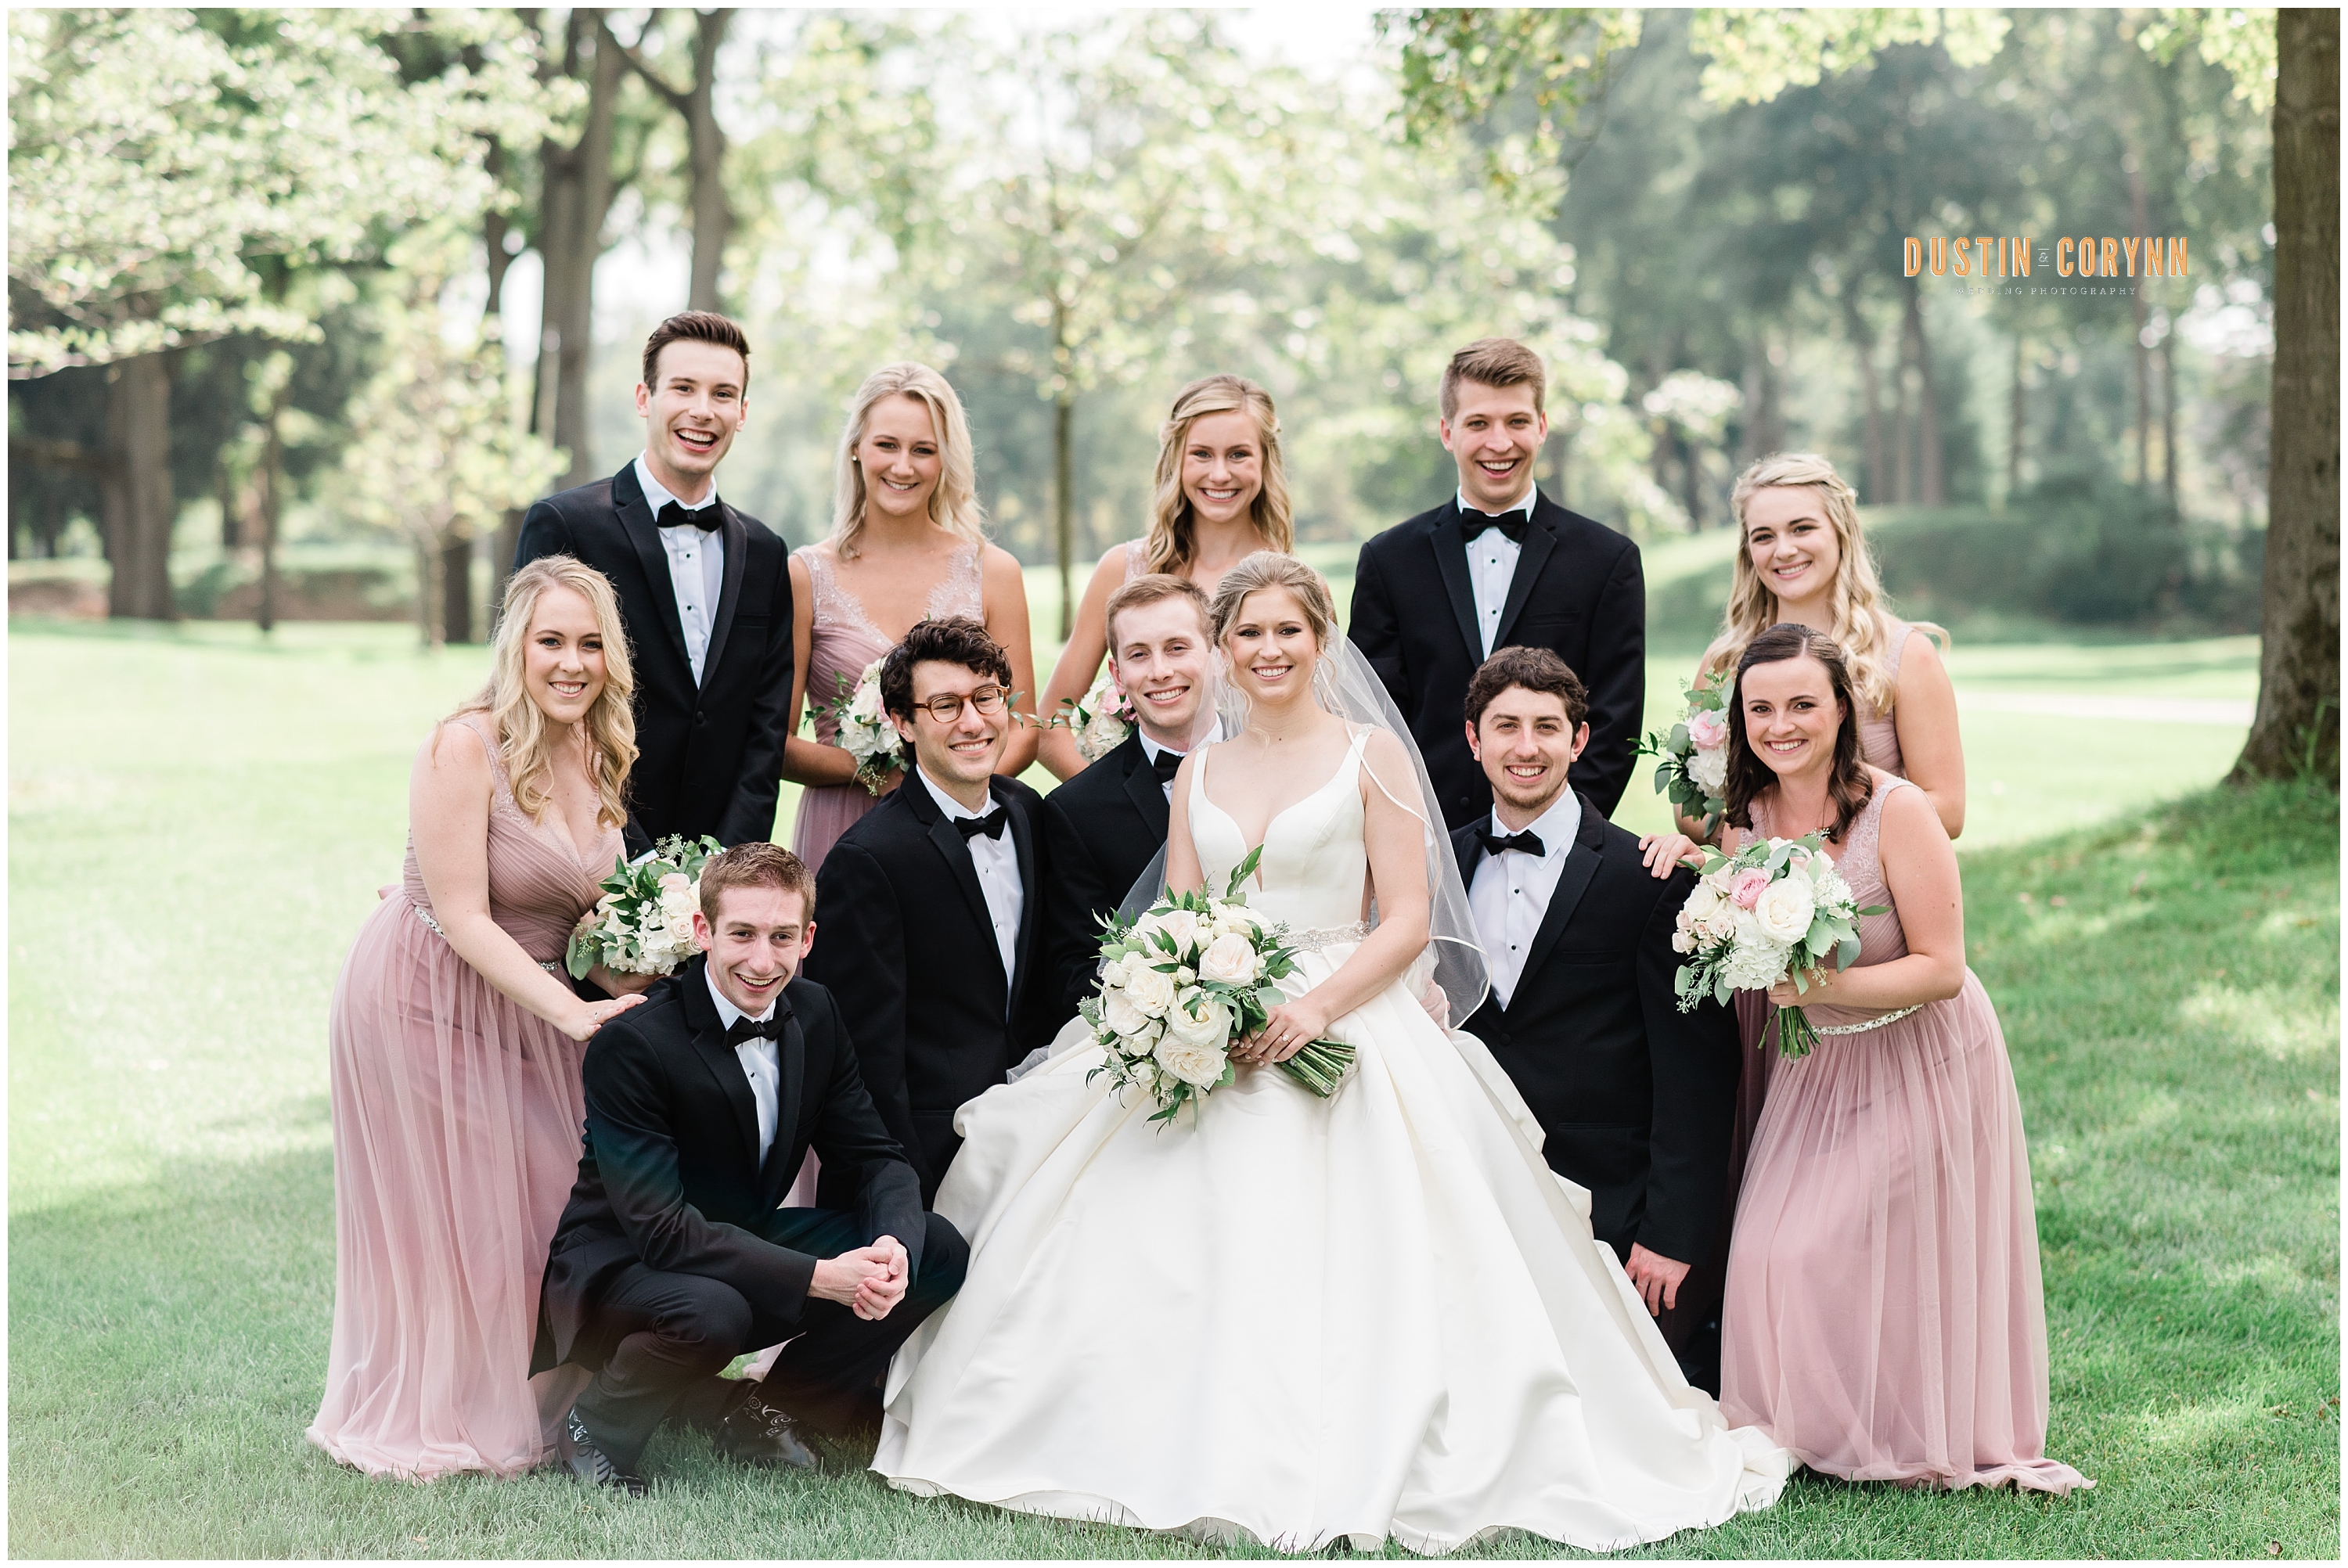 Fort Wayne wedding photographer captures bride and groom with wedding party wearing pink dresses and tuxedos